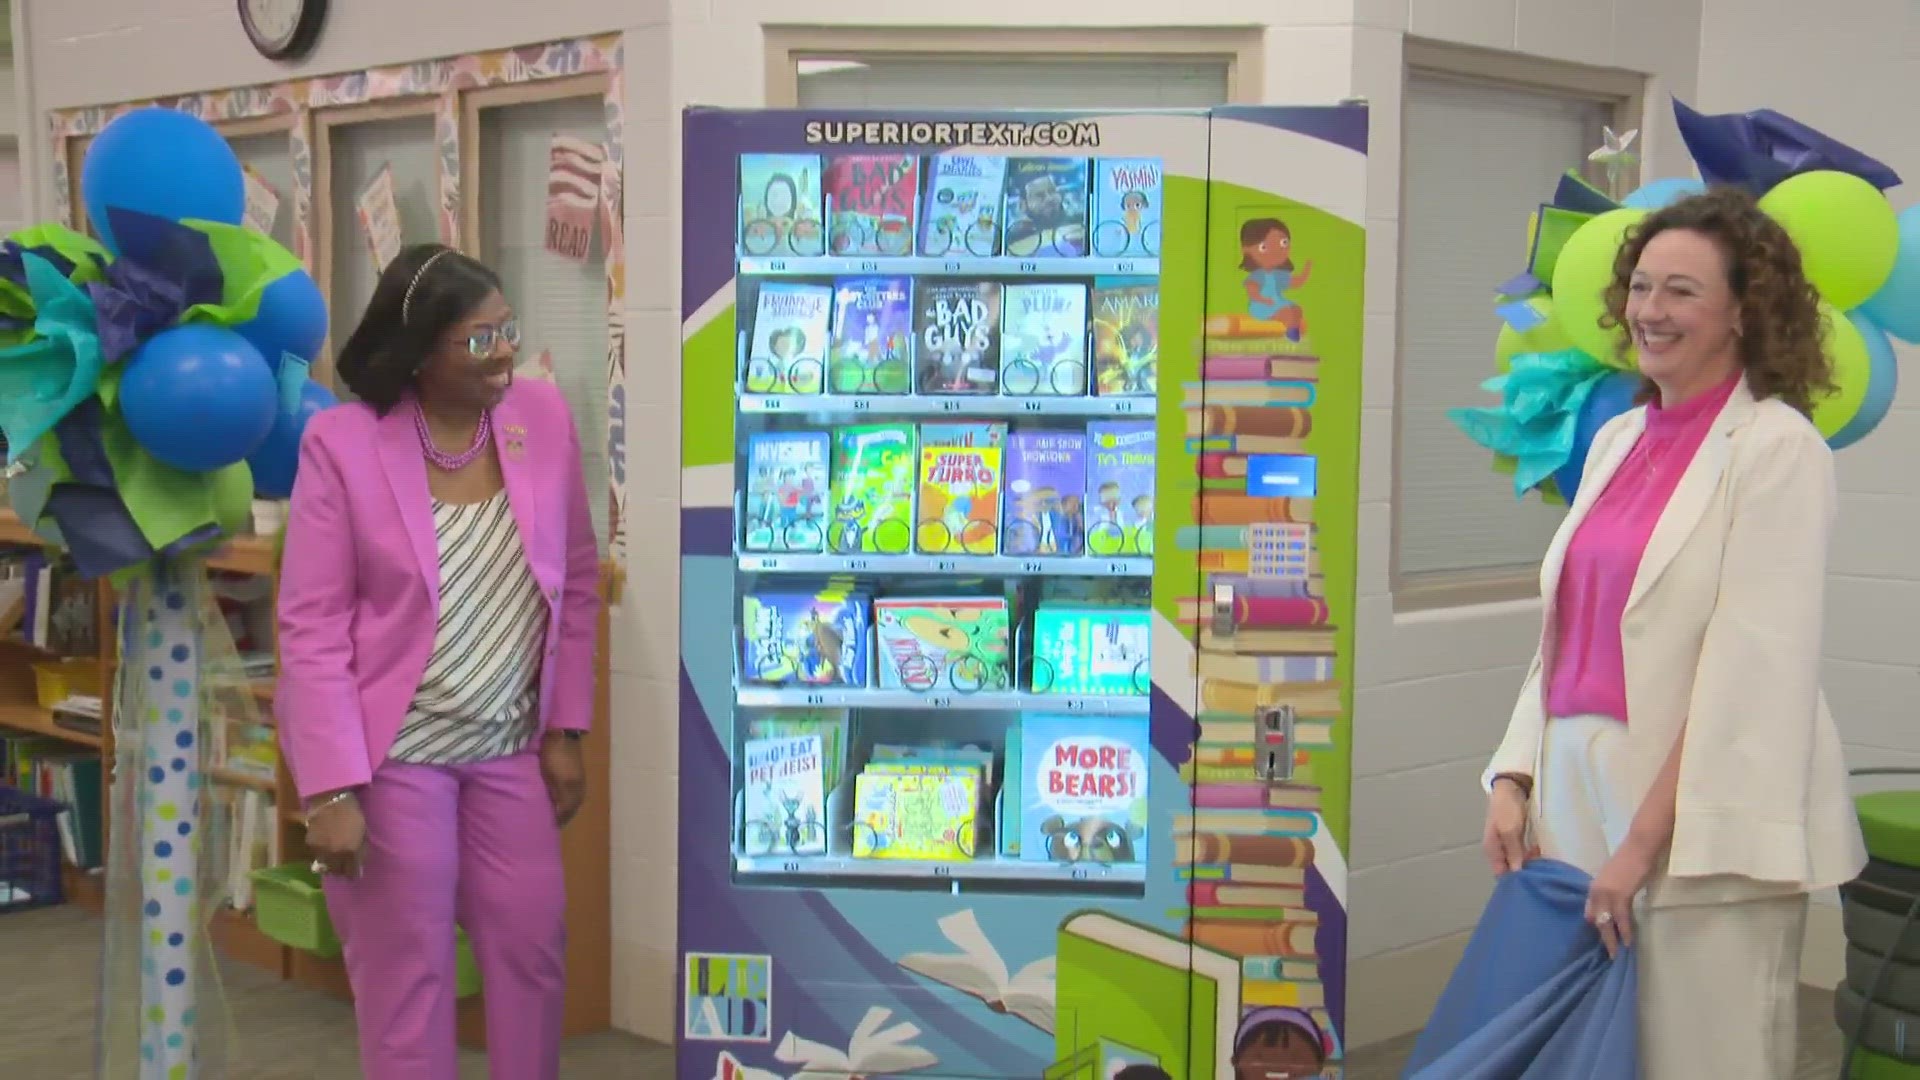 Instead of snacks, these vending machines will be filled with food for the mind!